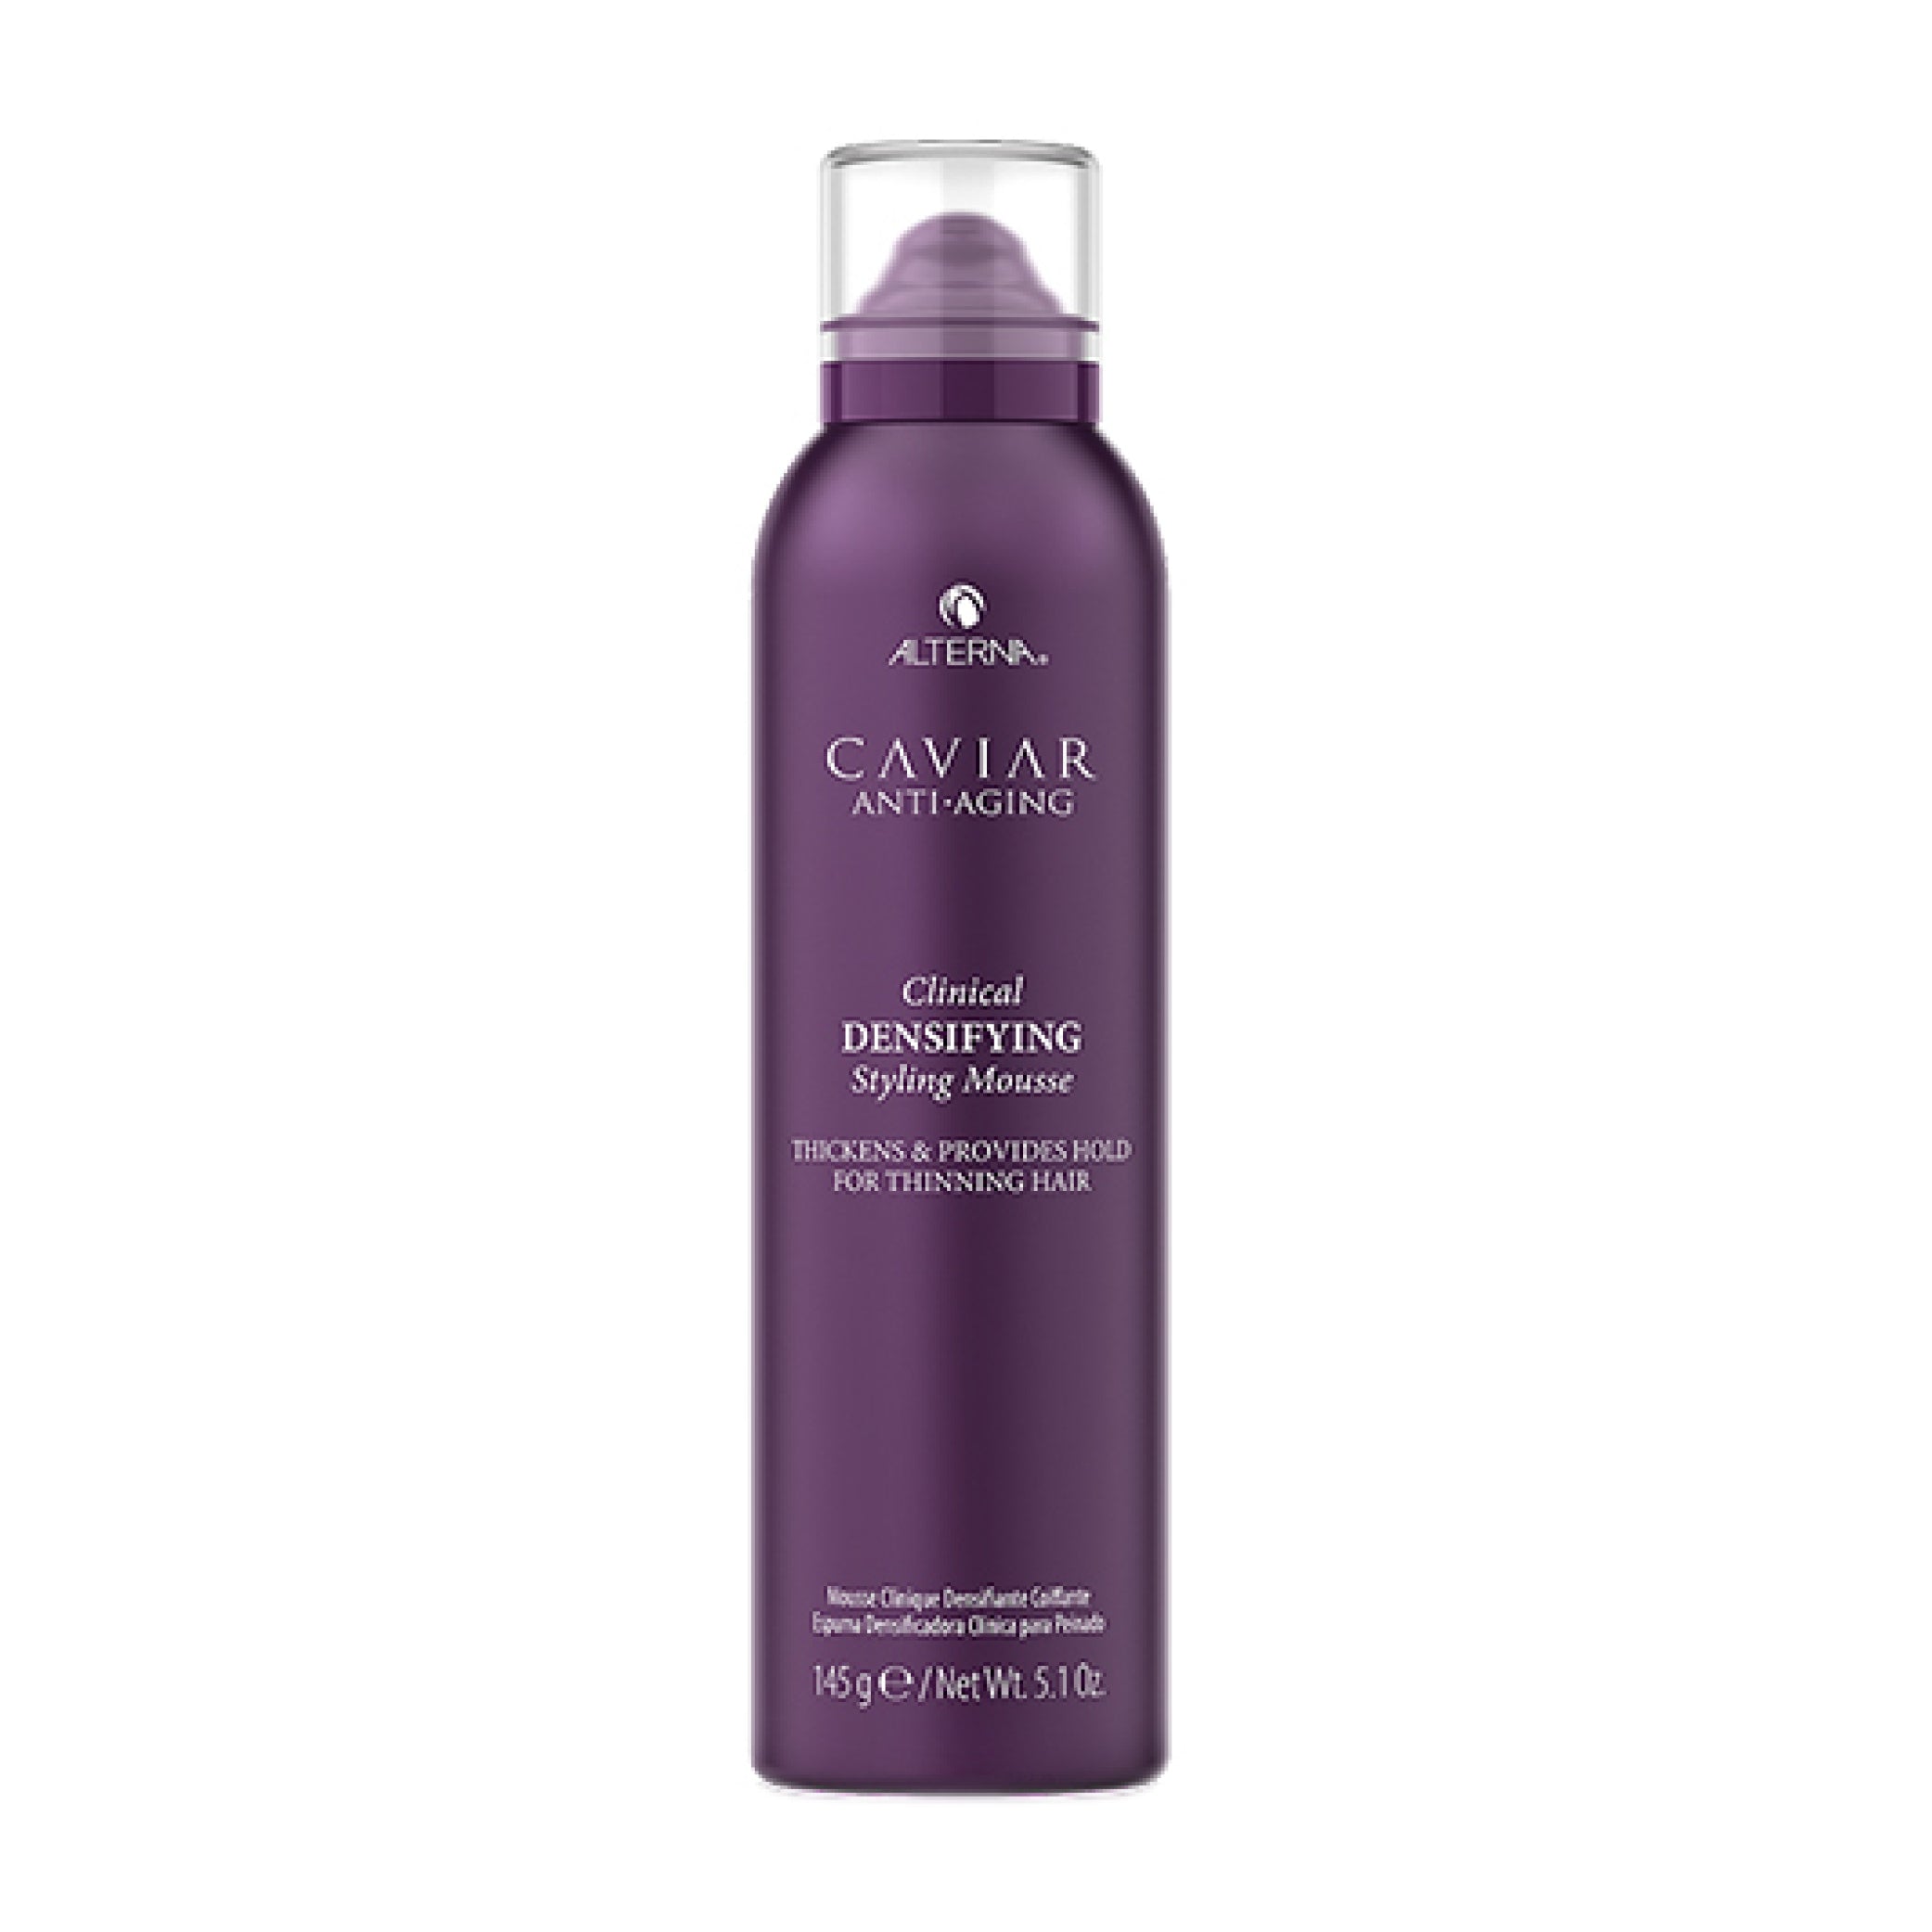 Clinical Densifying Styling Mousse